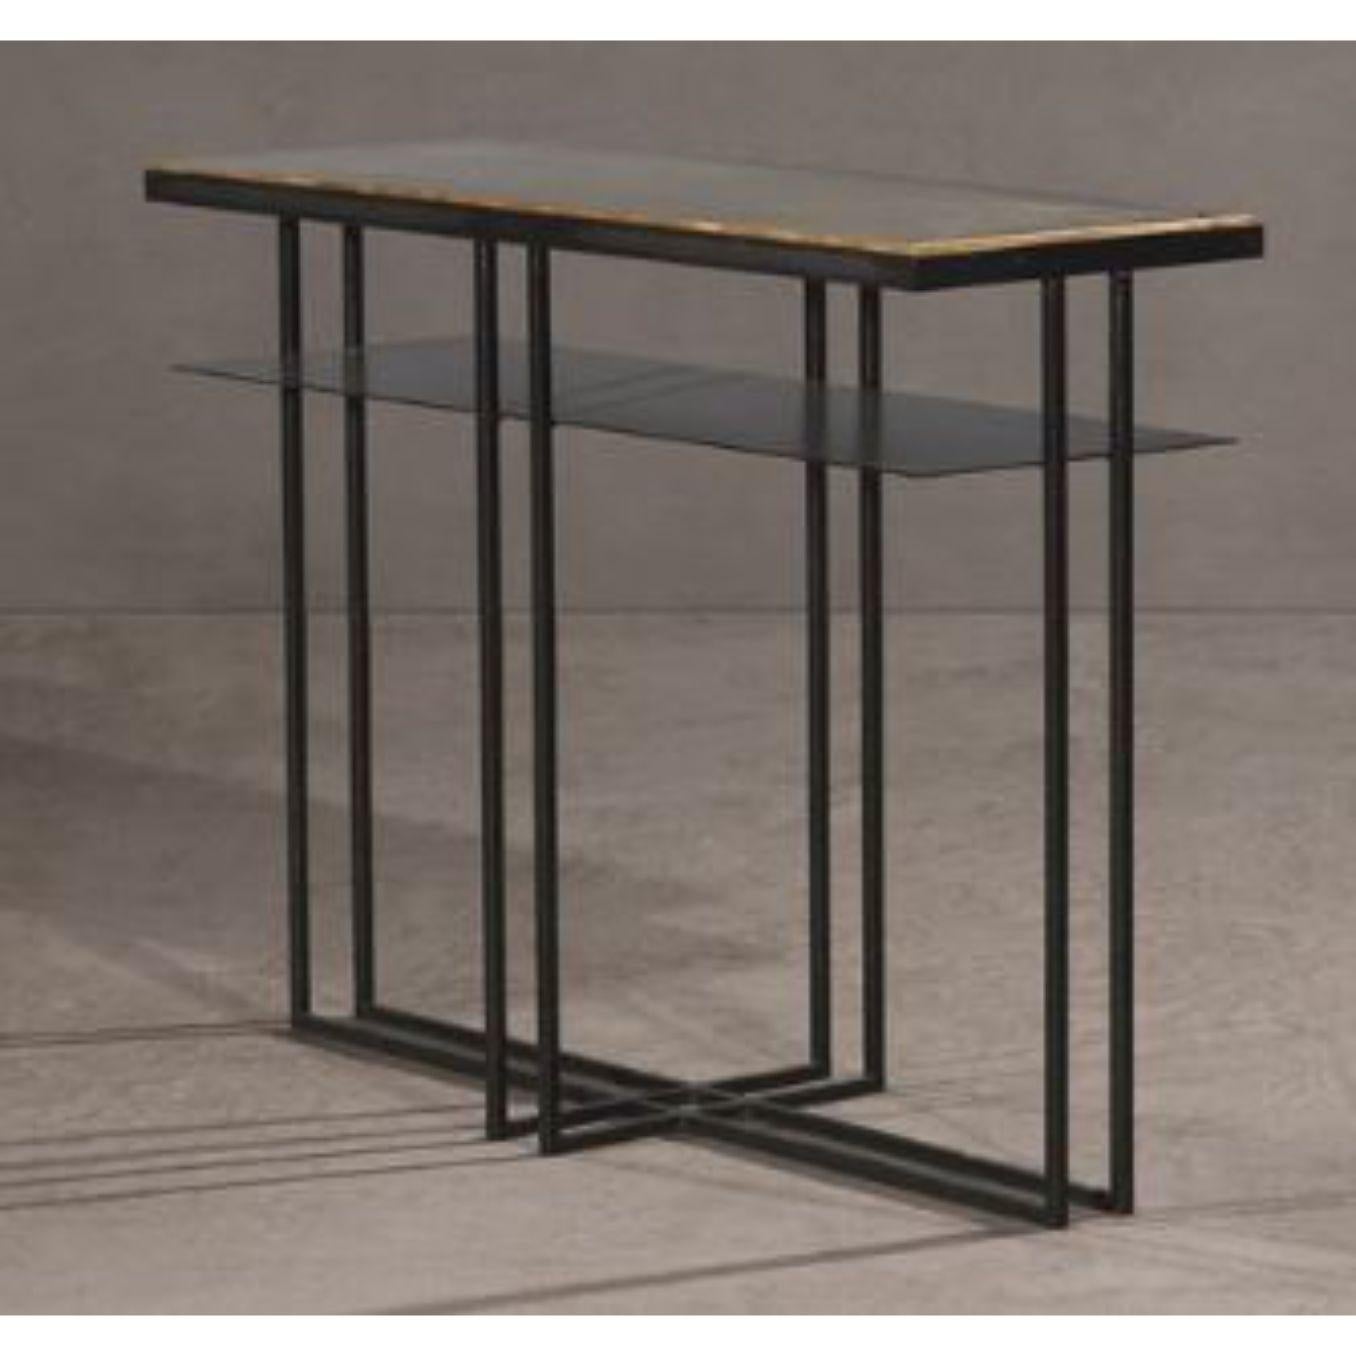 Brass cross binate side table by Novocastrian.
Dimensions: W 25 x D 71 x H 55 cm. 
Materials: A range of Cumbrian slates, blackened steel, hand patinated brass.
Also available in different dimensions. 


Novocastrian

We are metalworkers,